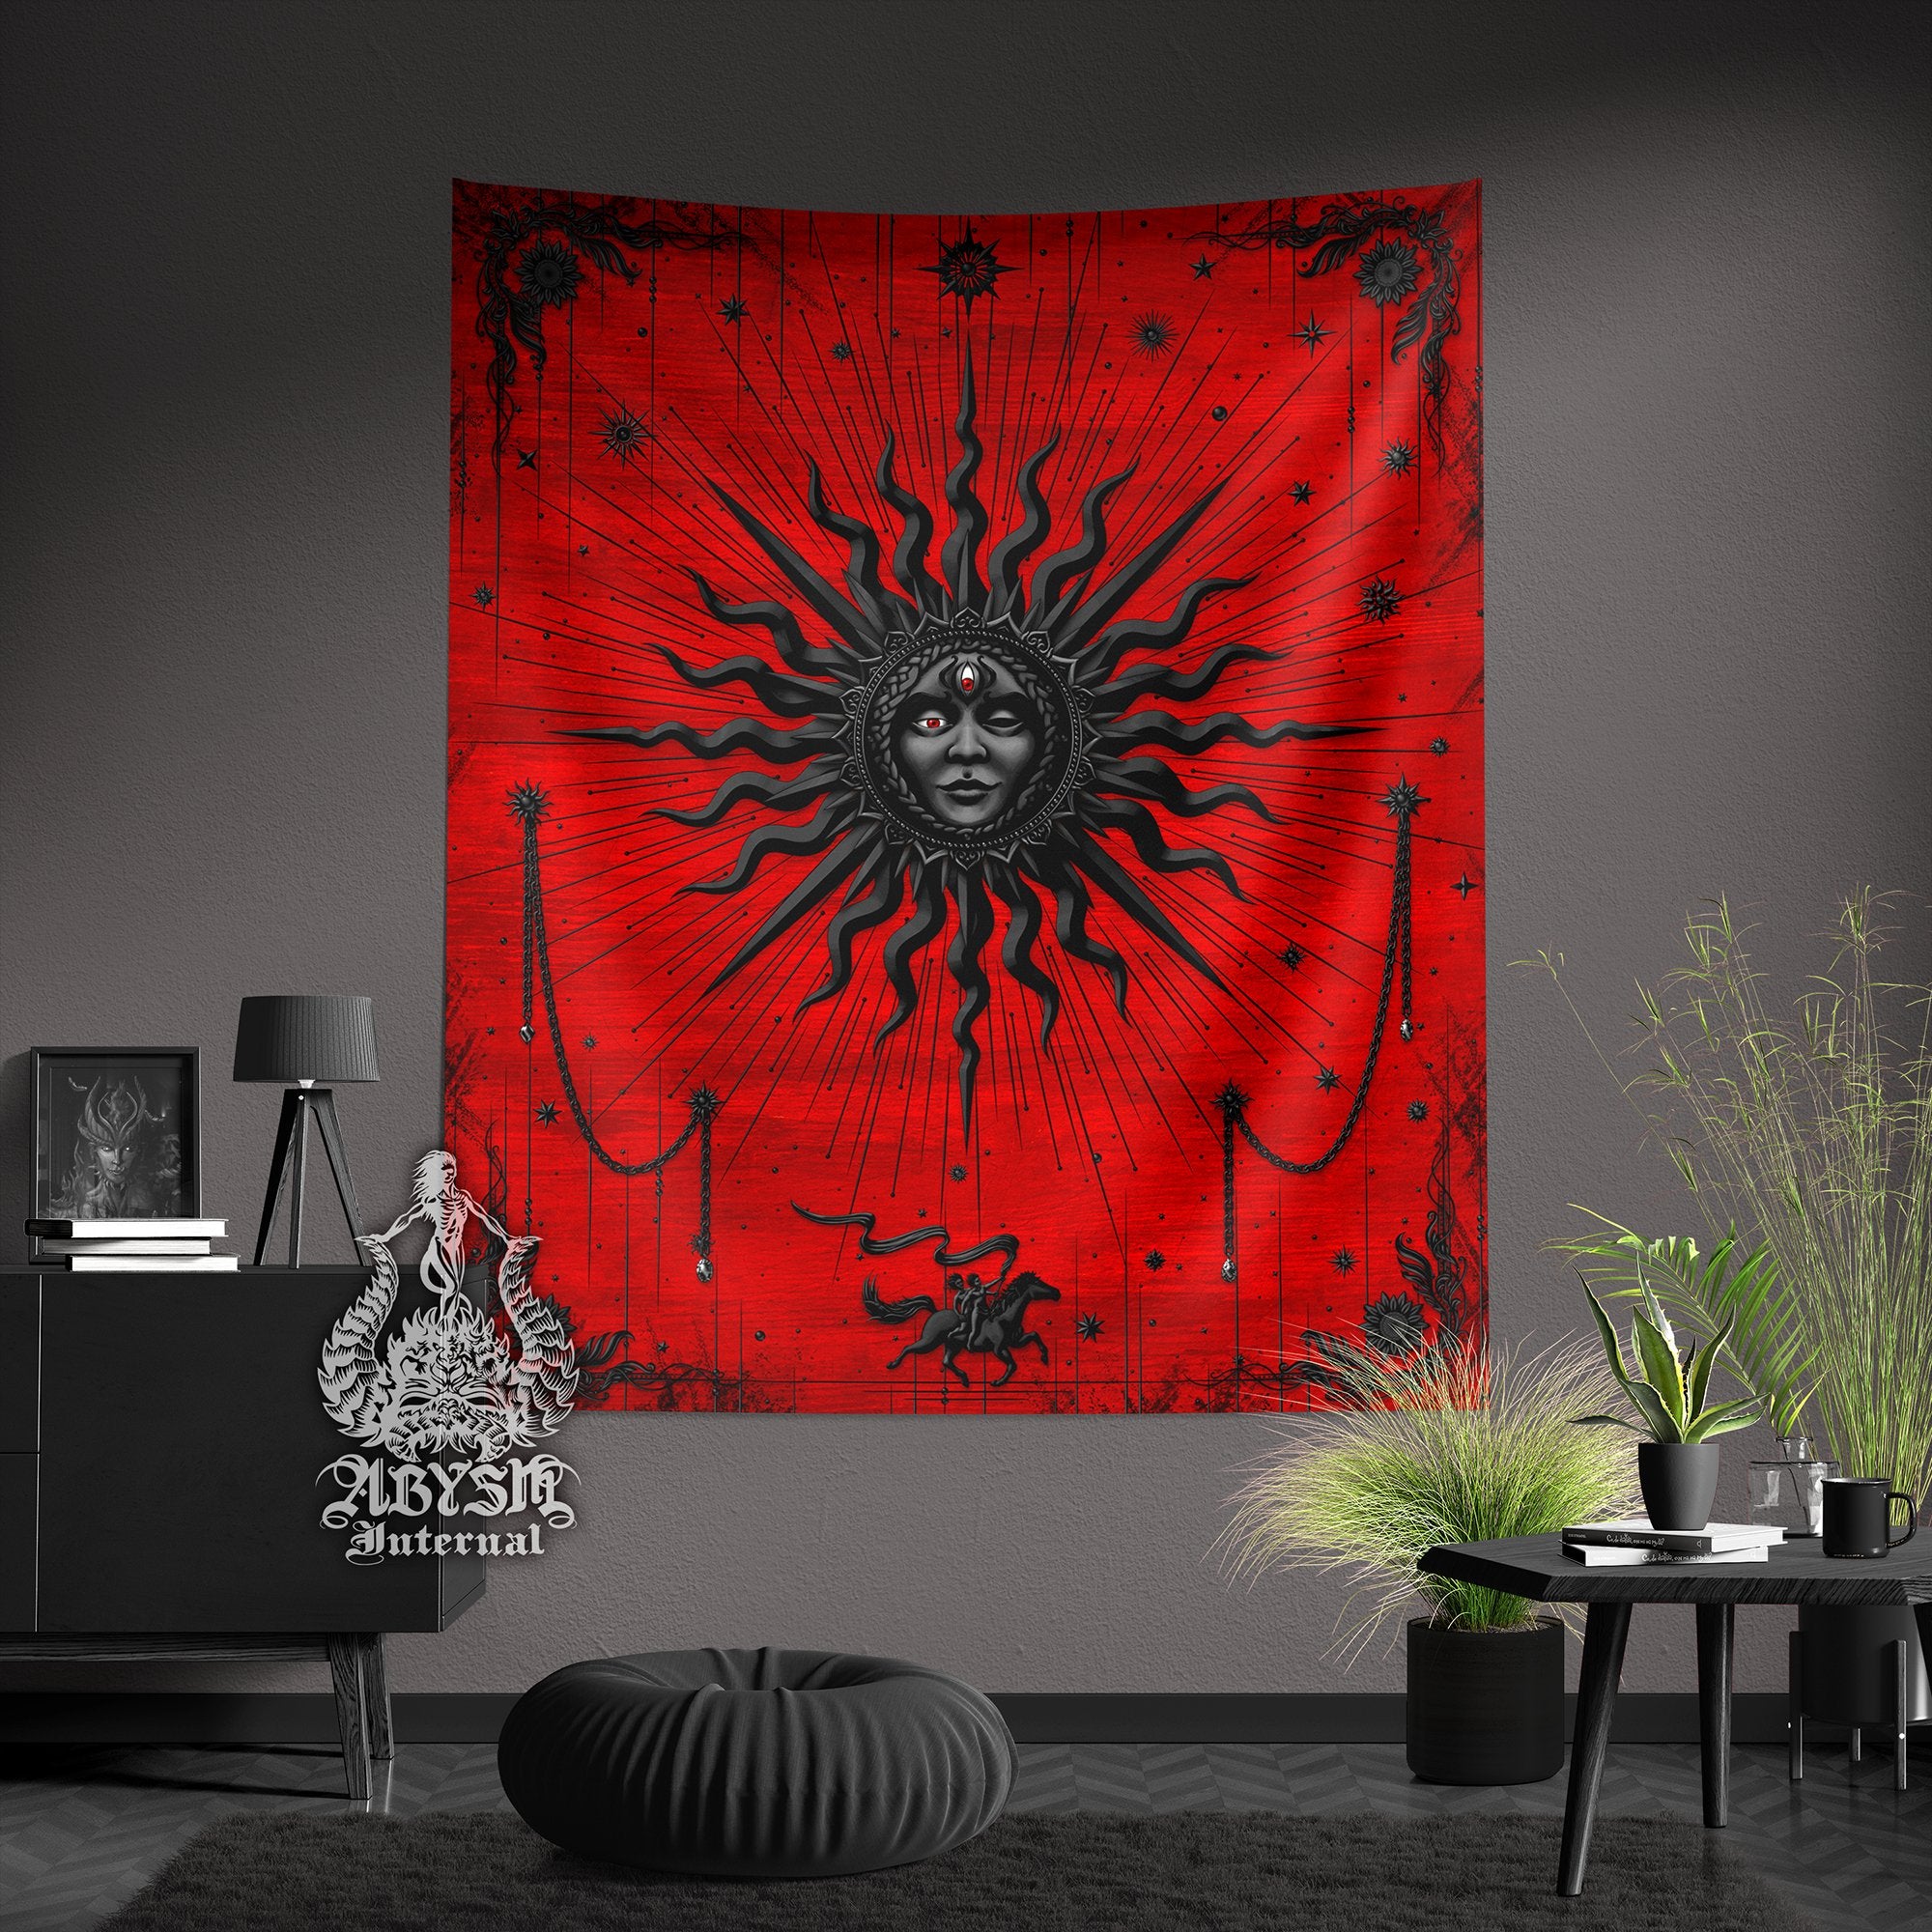 Bloody Goth Sun Tapestry, Tarot Card Arcana Wall Hanging, Gothic Witch's Room Decor, Witchy Home, Magic and Esoteric Art, Vertical Print - Red Black - Abysm Internal